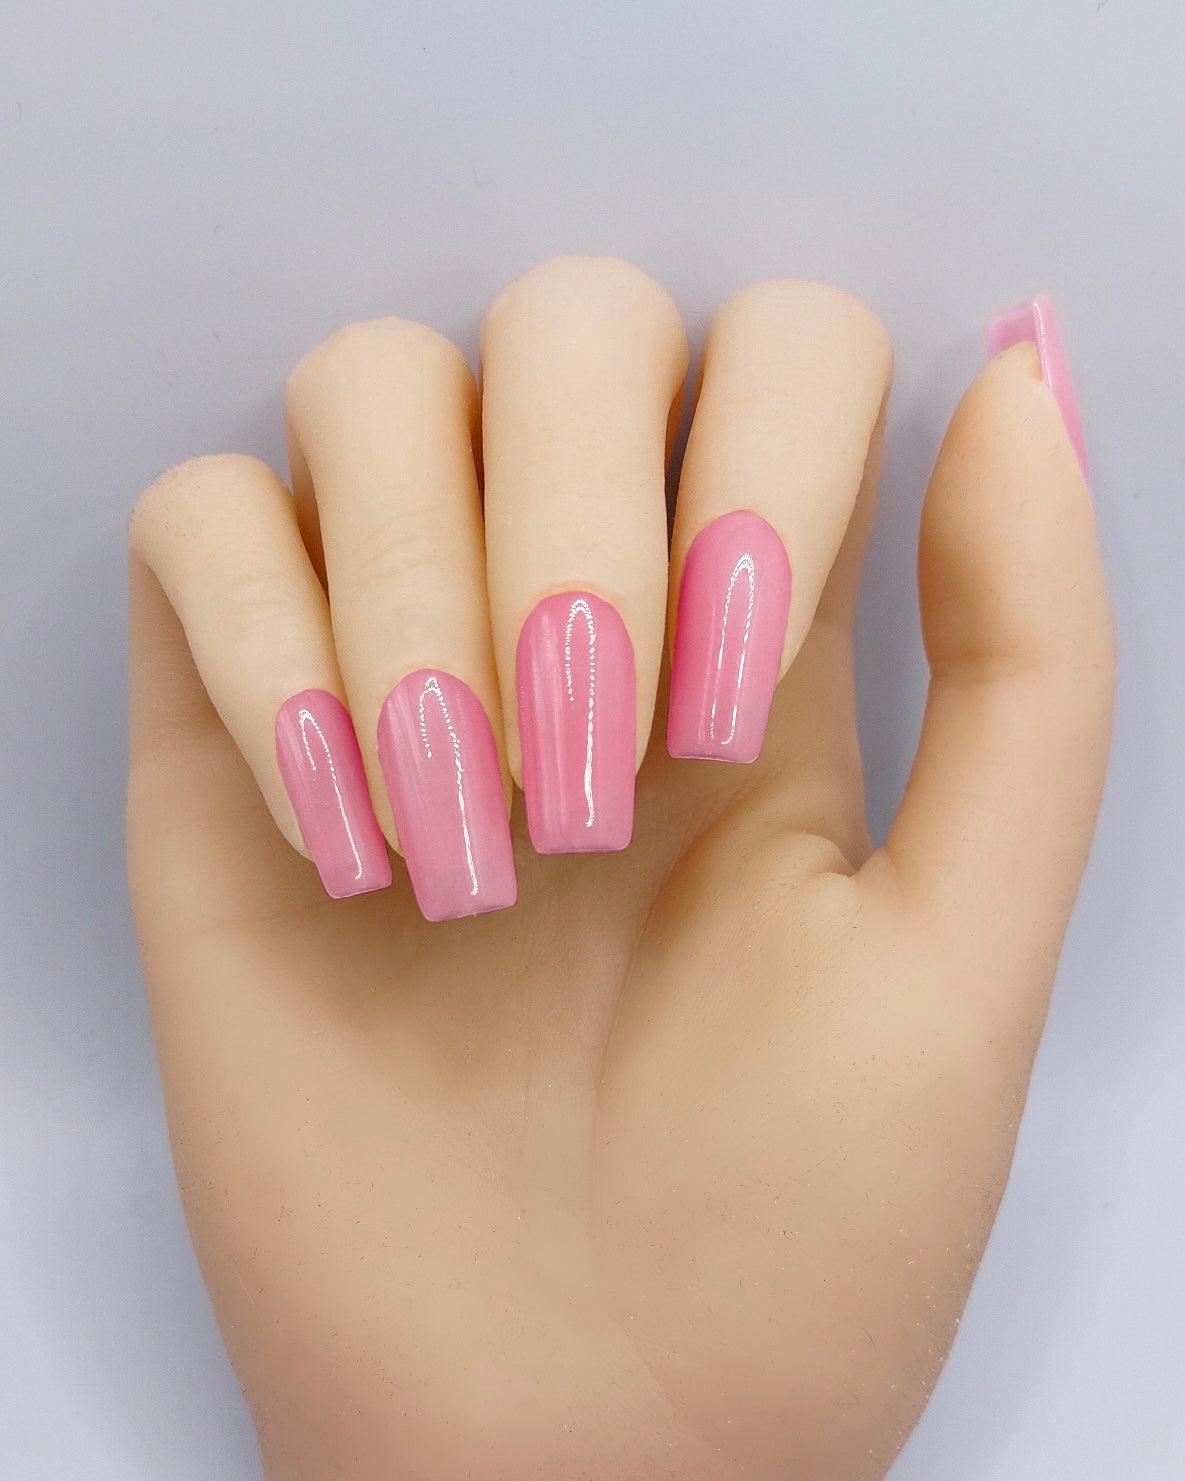 Milky Nails (8 Color Options) - FancyB Press-on Nails